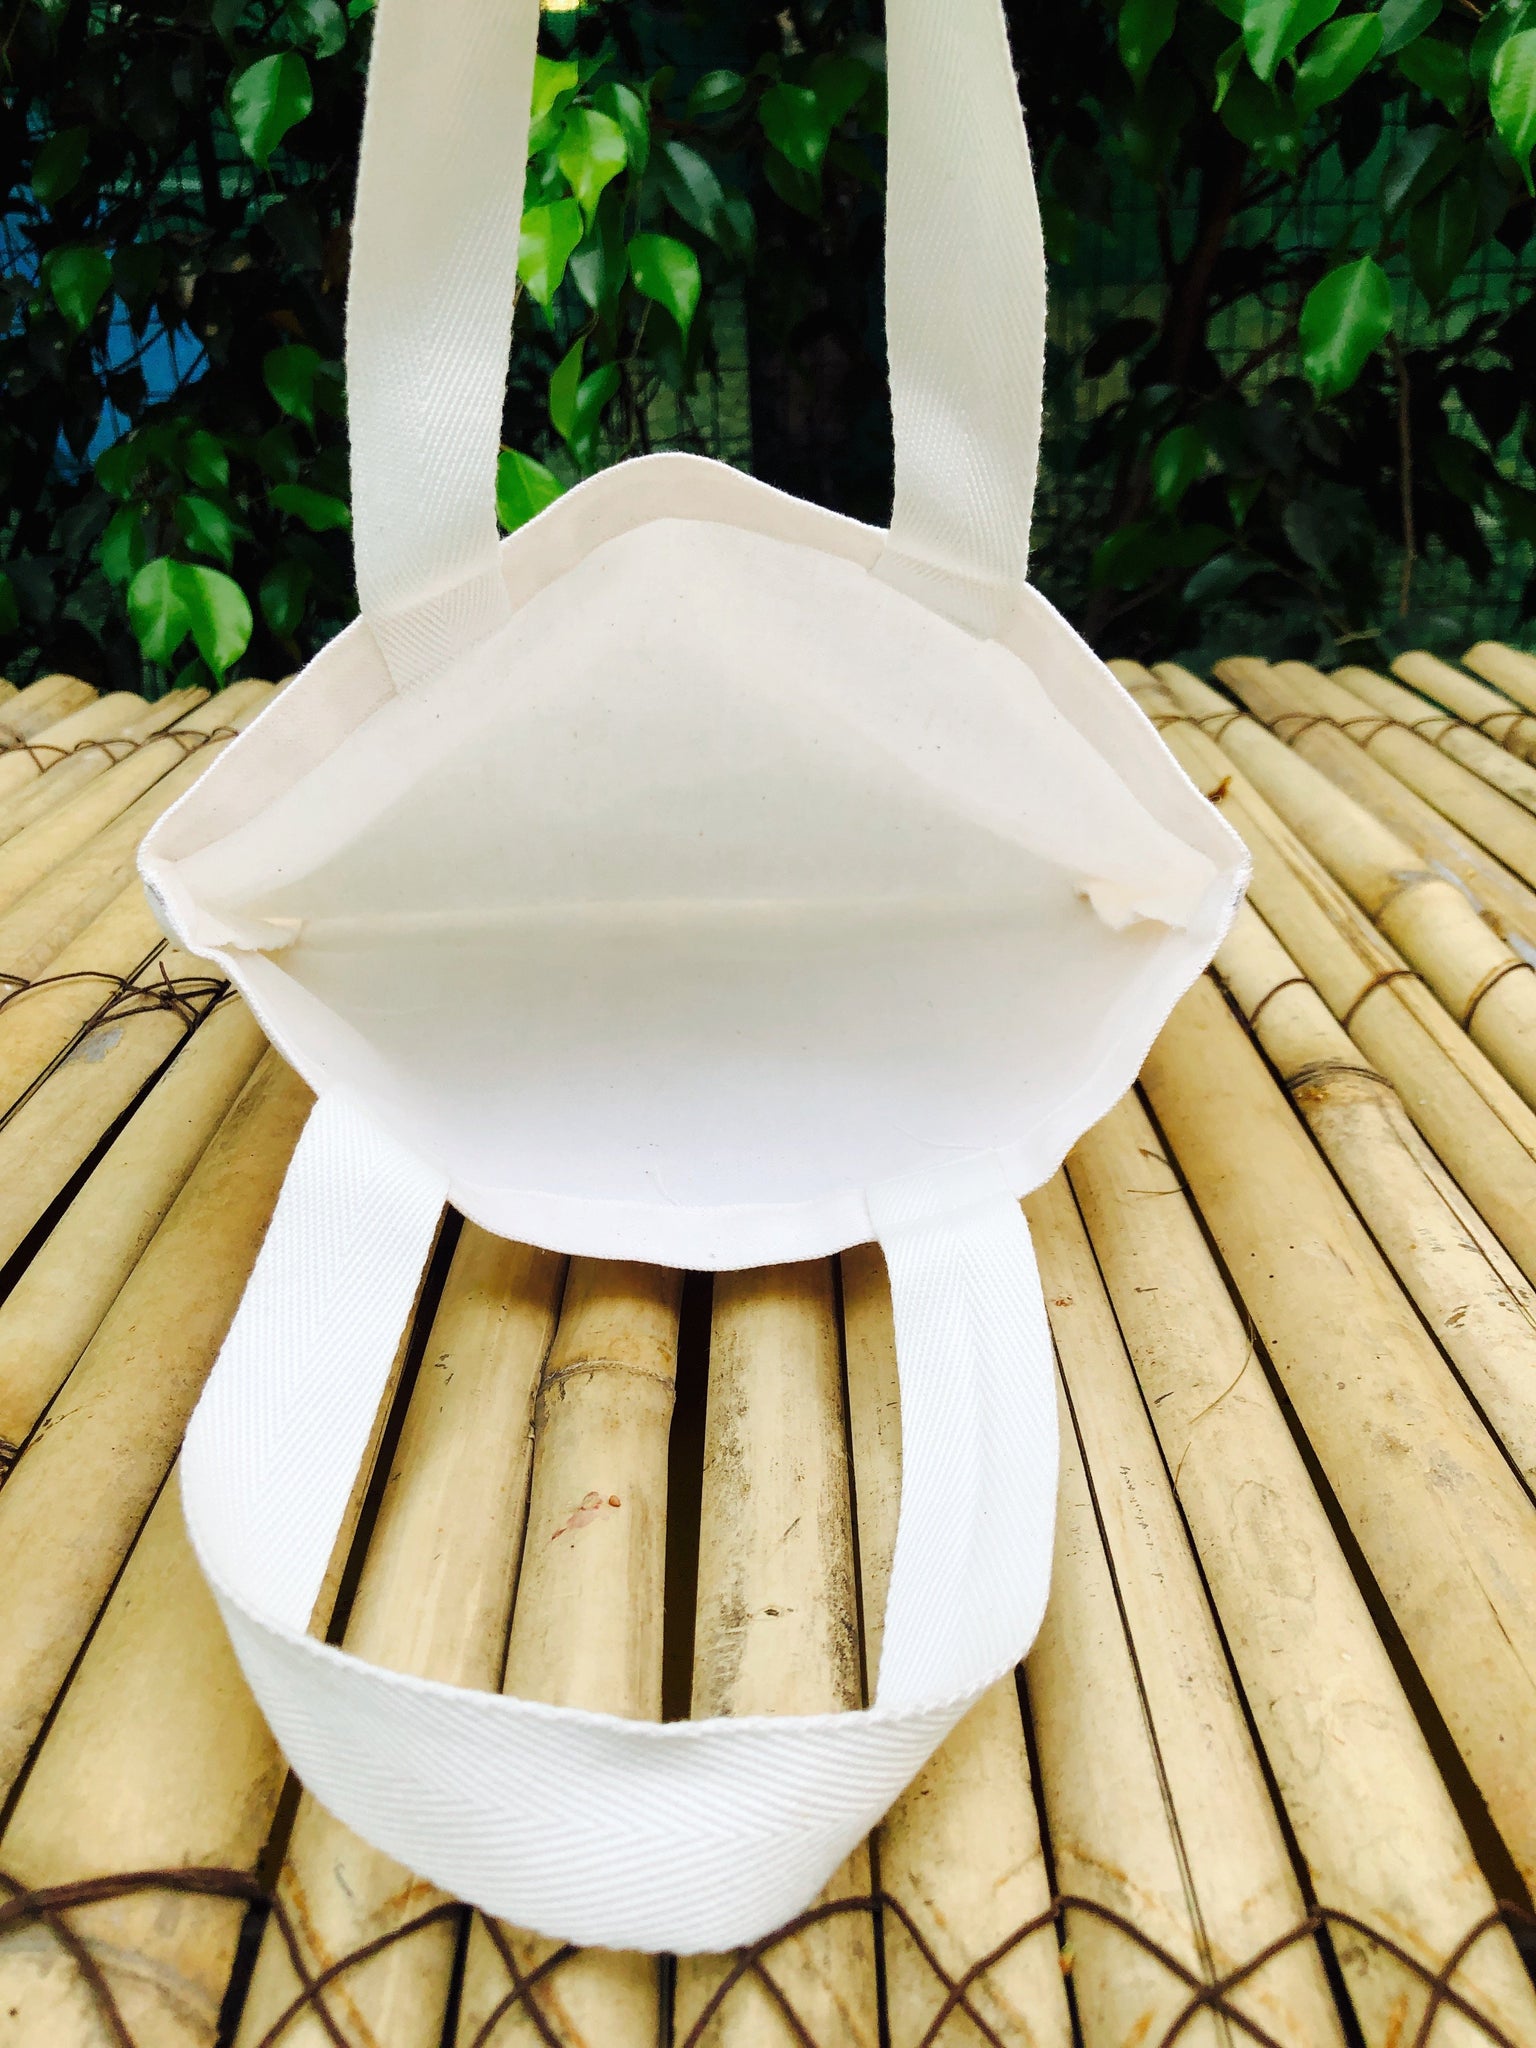 White Eco-friendly Canvas Tote Bag for Everyday Use : Foldable